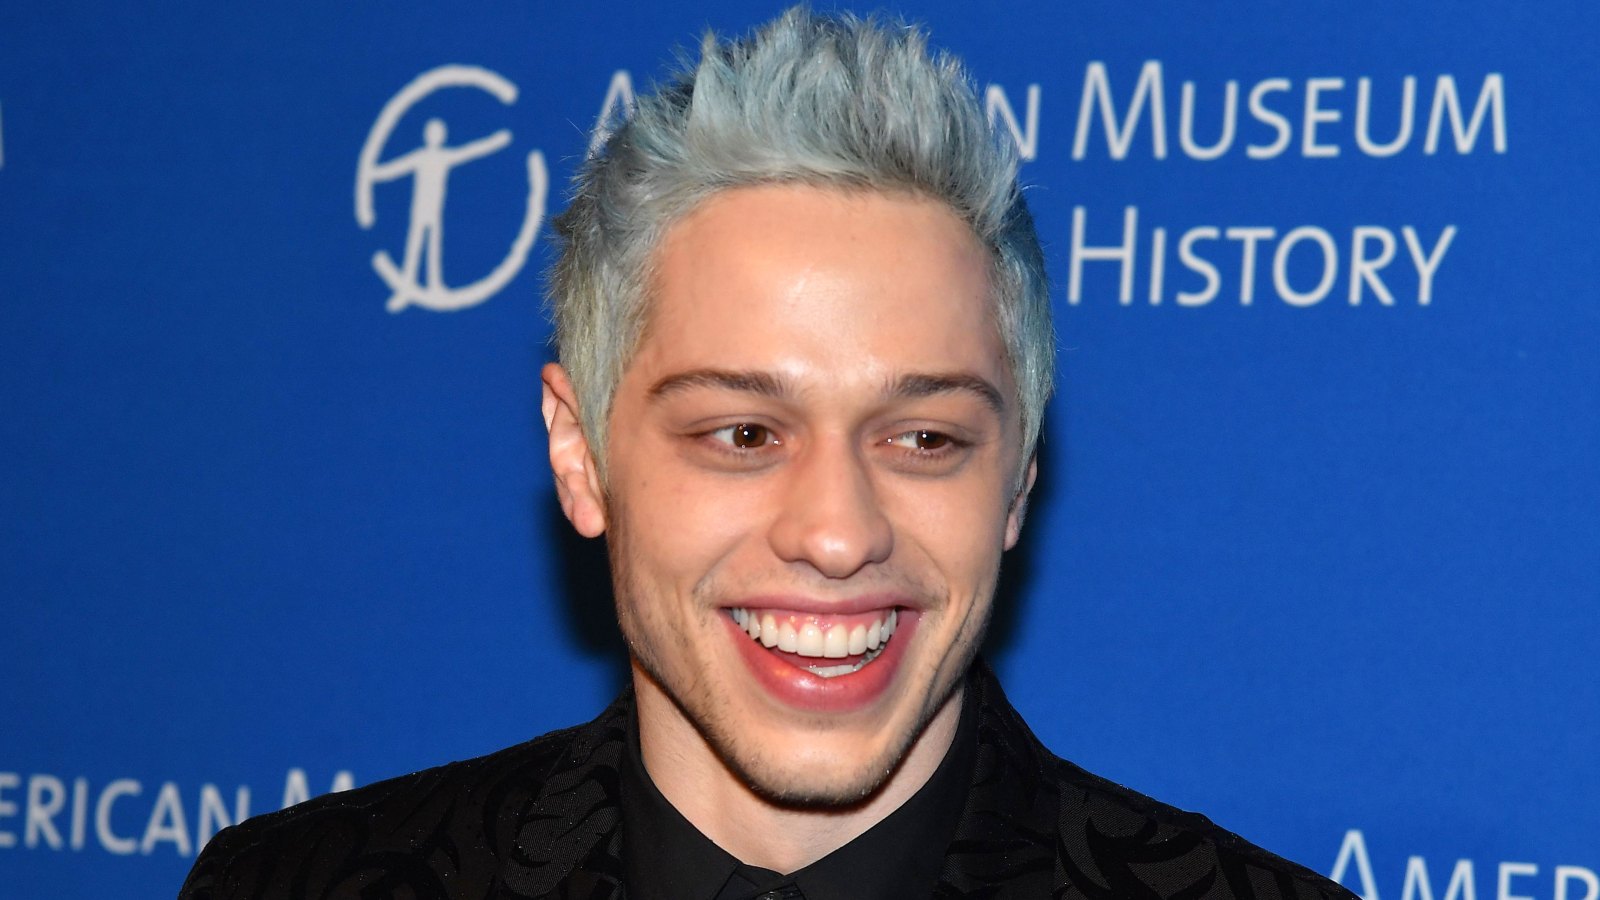 Pete-Davidson-Hooked-Up-With- Friend-After-Ariana- Grande-Split